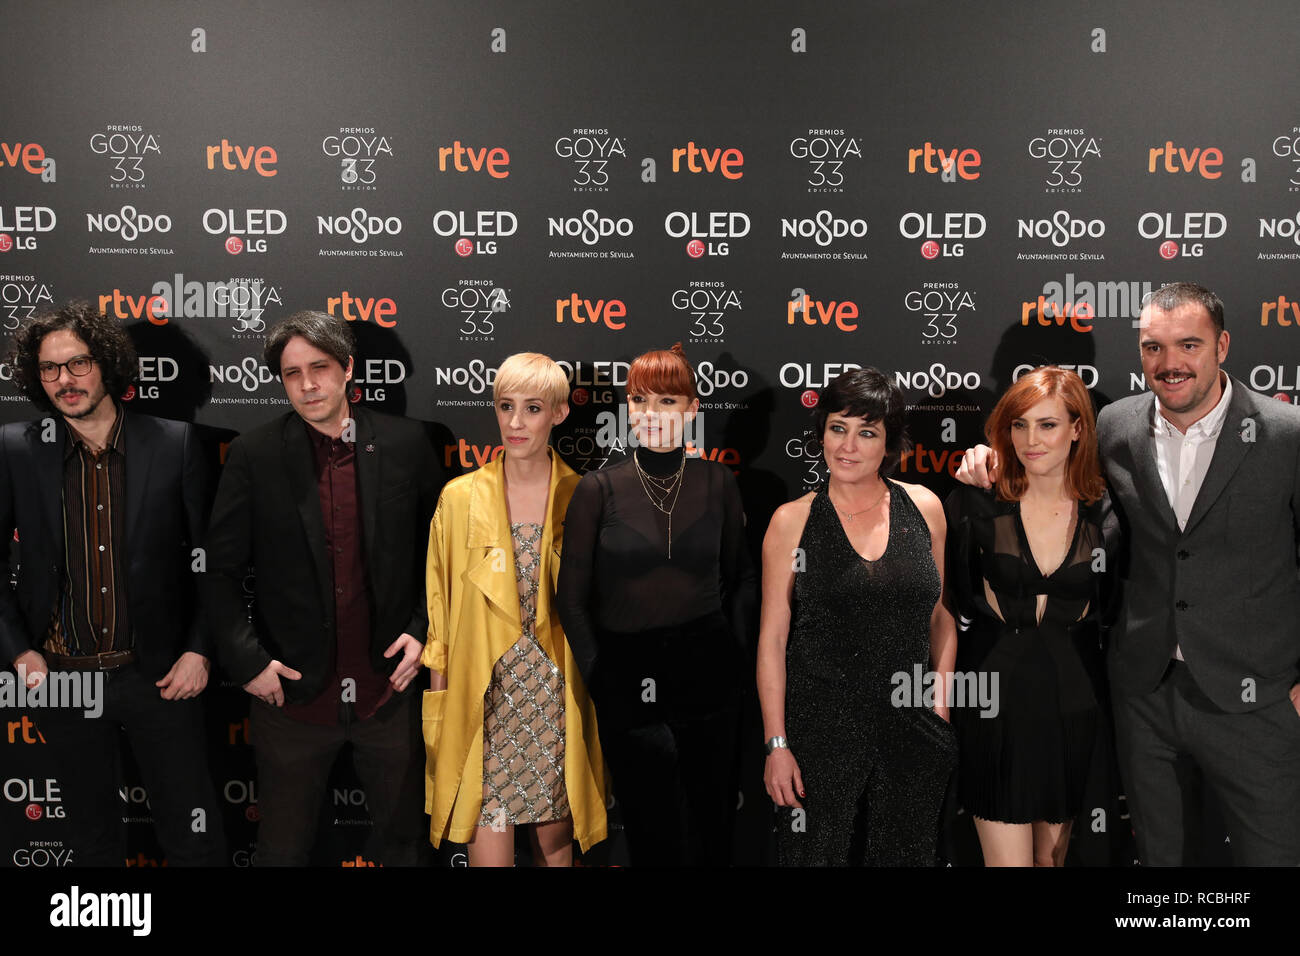 The team of the movie 'Quién te cantará'. The Goya 2019 has already started with the Nominees party, held this Monday at the Teatro Real in Madrid, to where some of the most important faces of Spanish cinema and the nominees in all categories of the awards have moved. Stock Photo